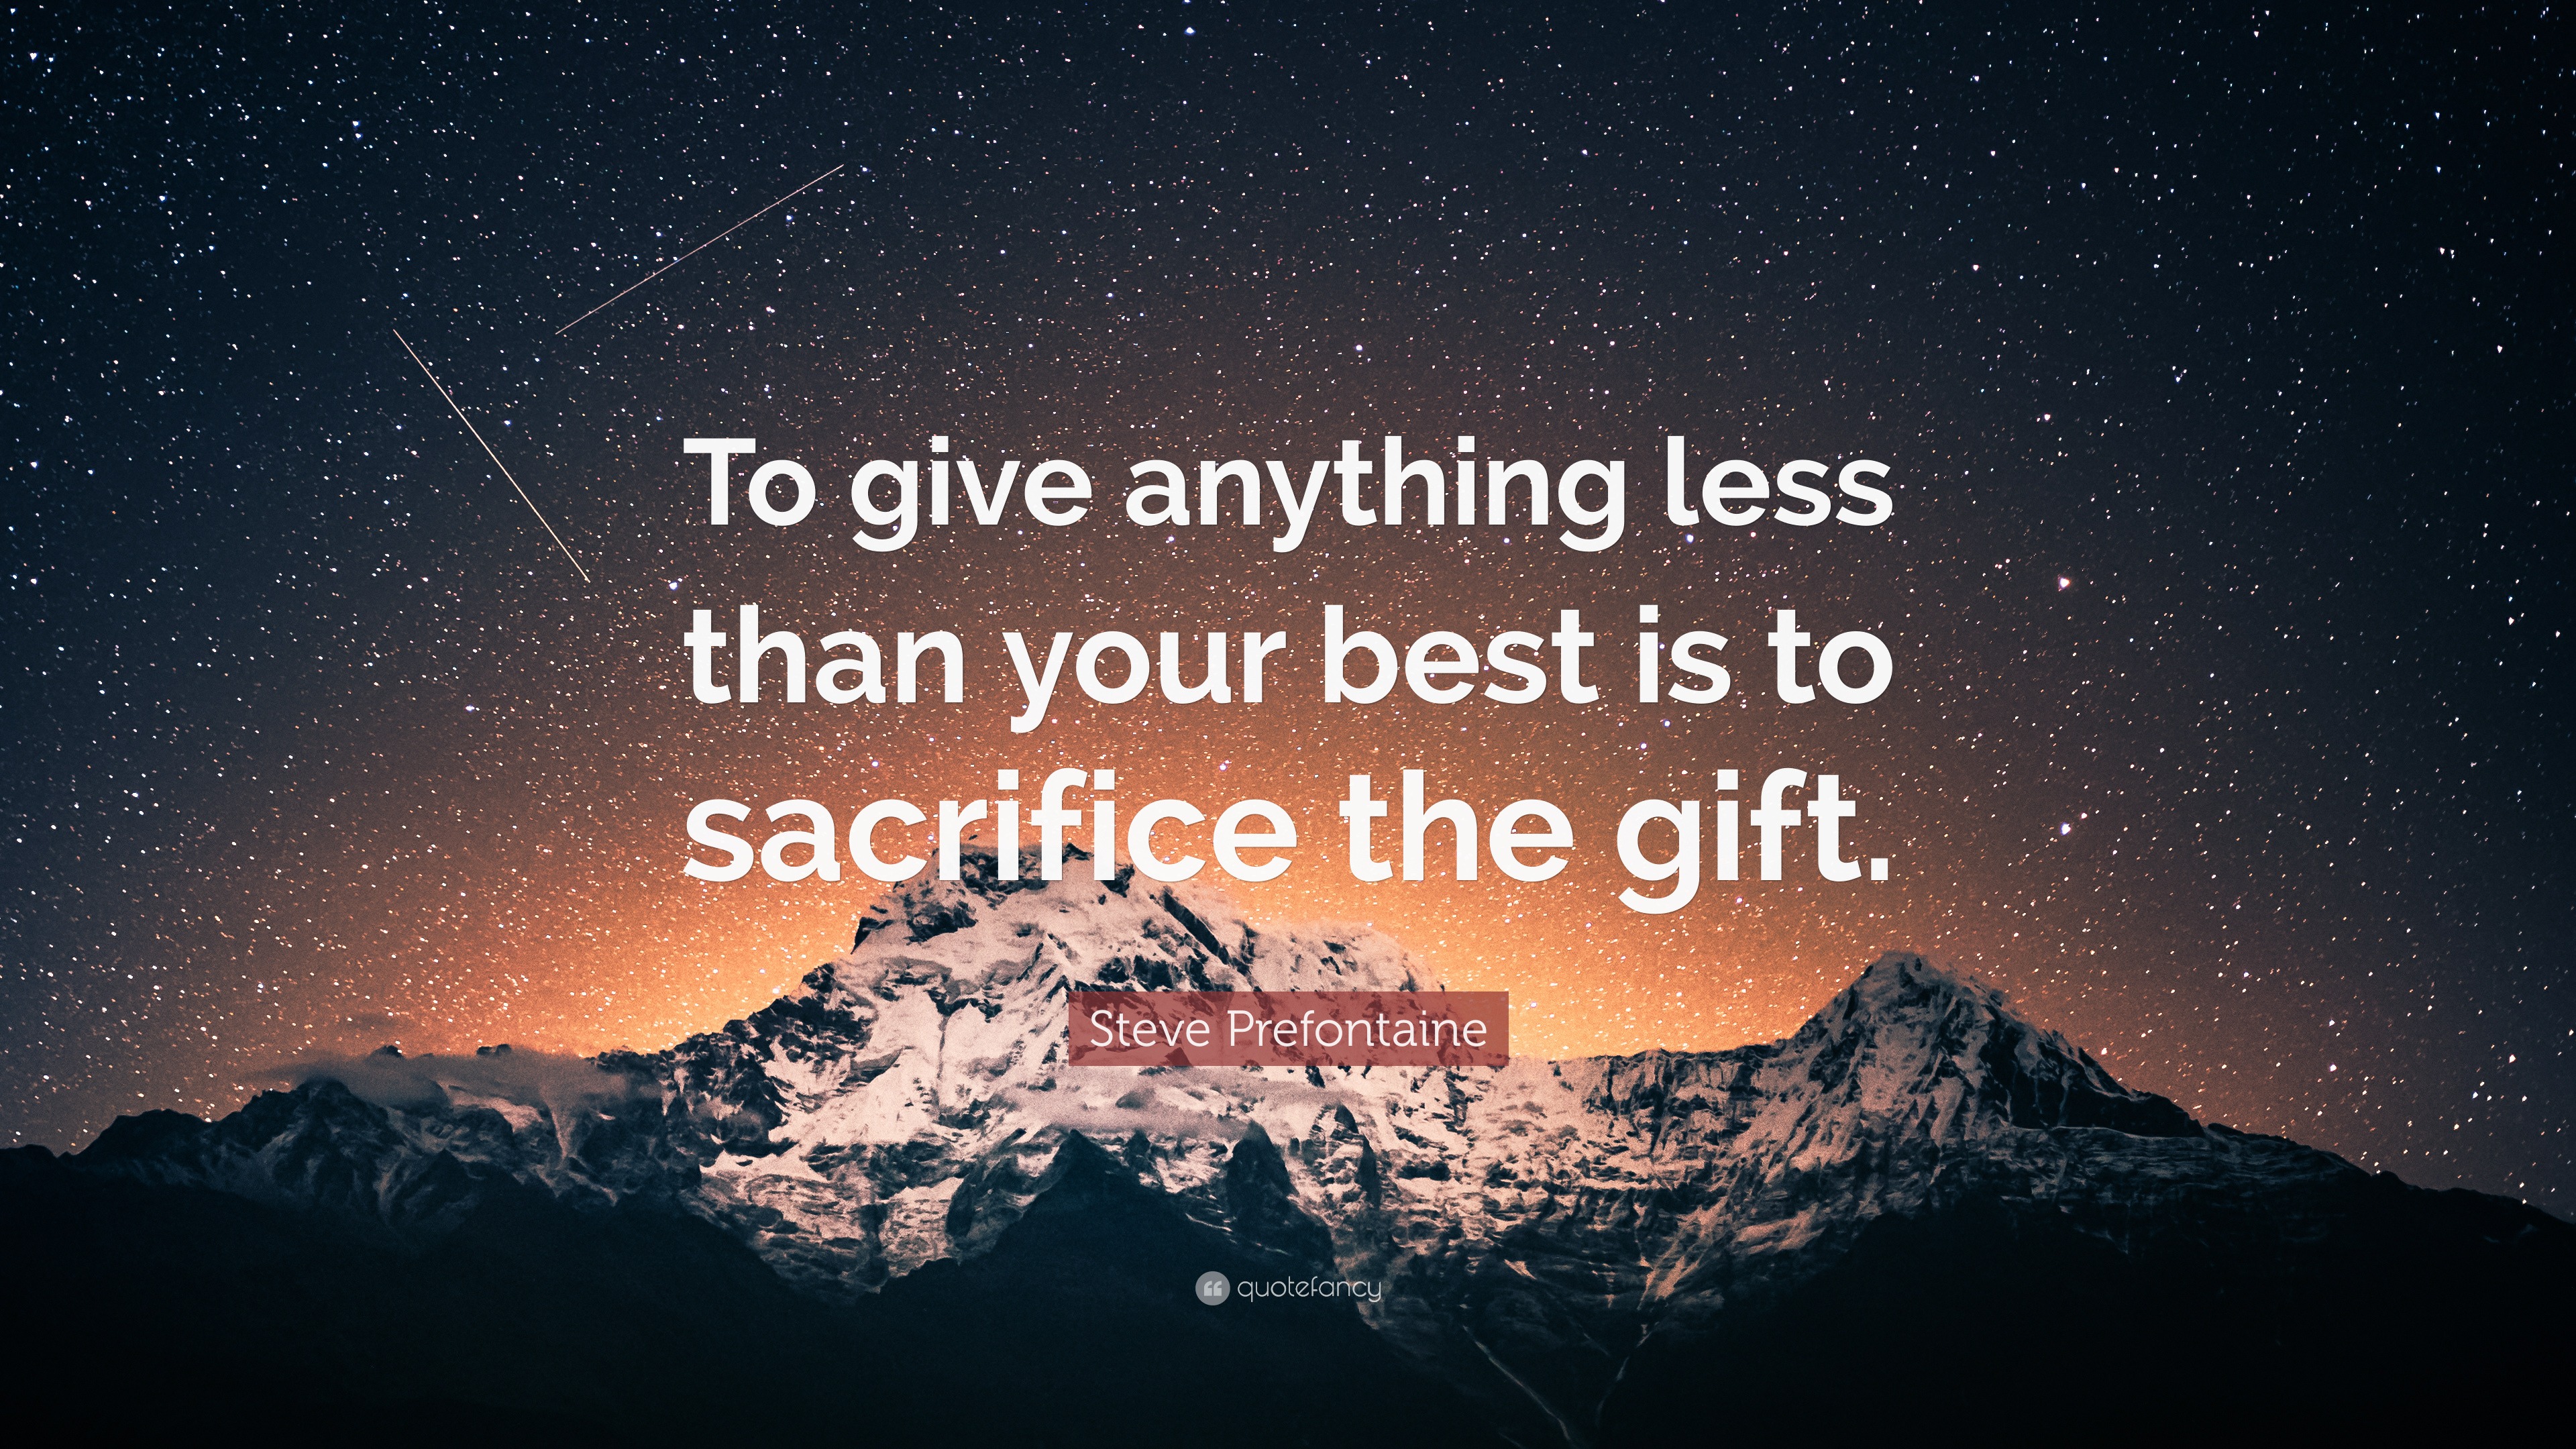 Steve Prefontaine Quote “To give anything less than your